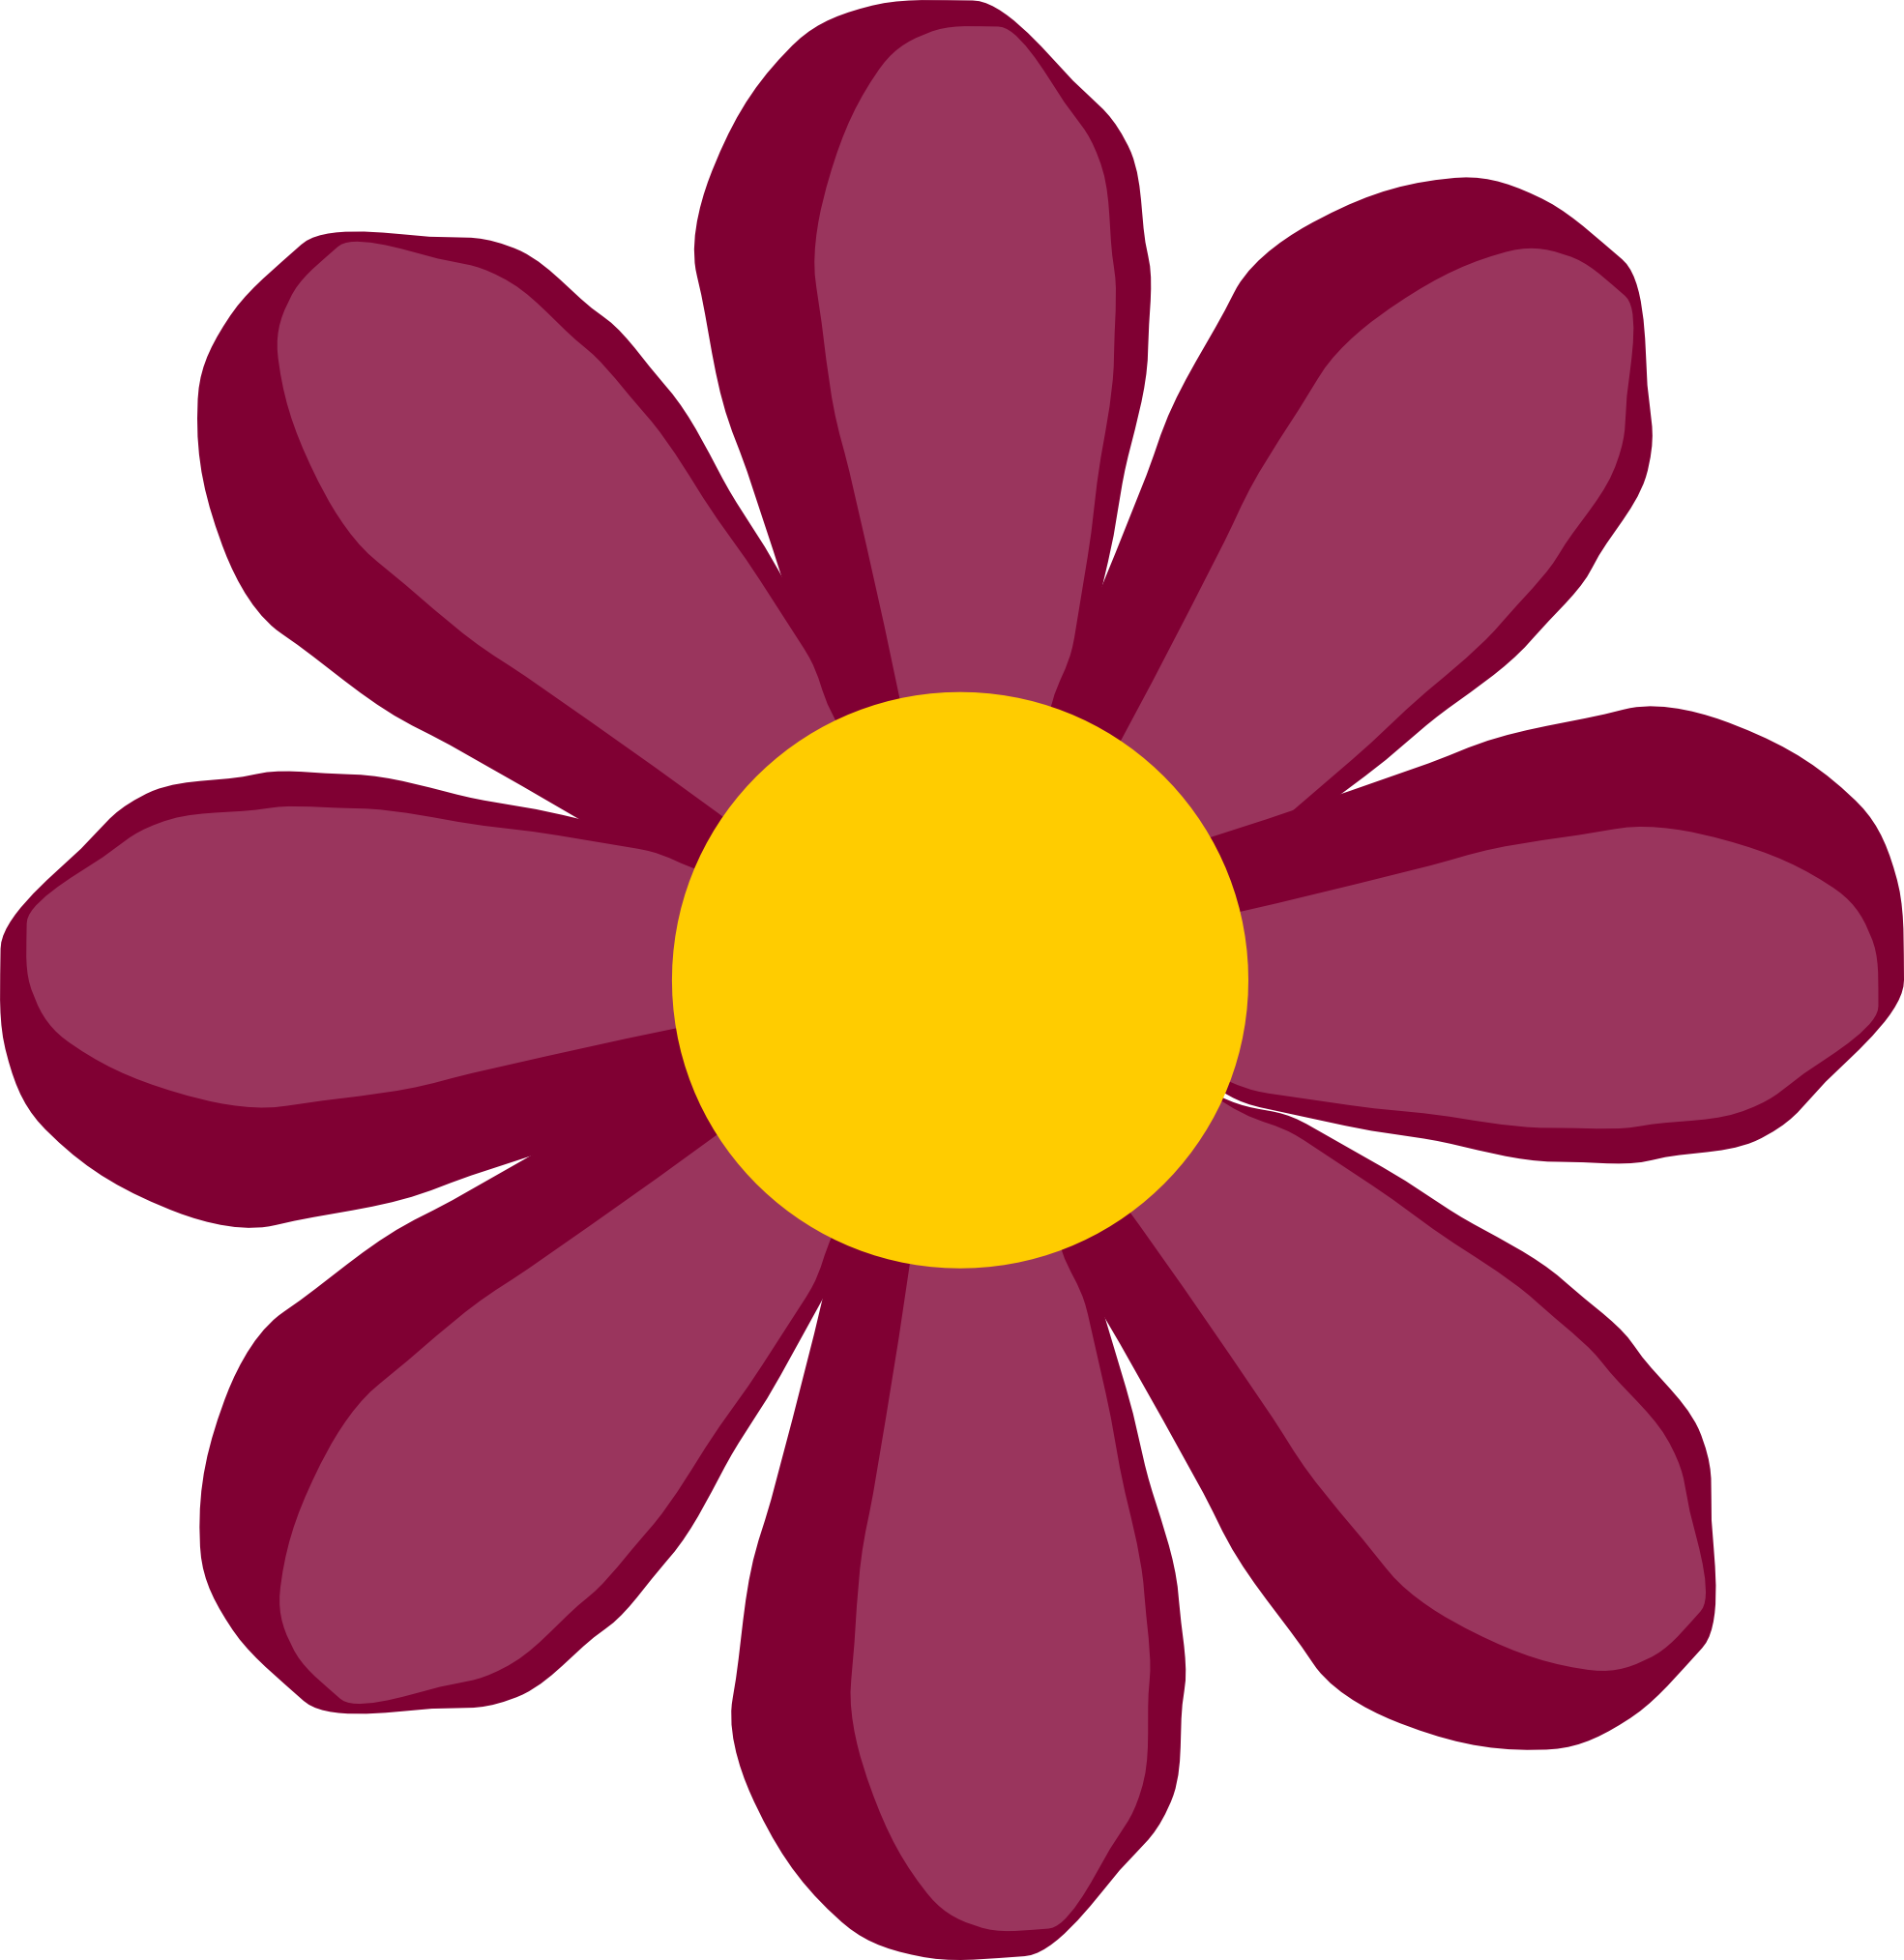 Hippie Daisies And Flowers Clipart - ClipArt Best